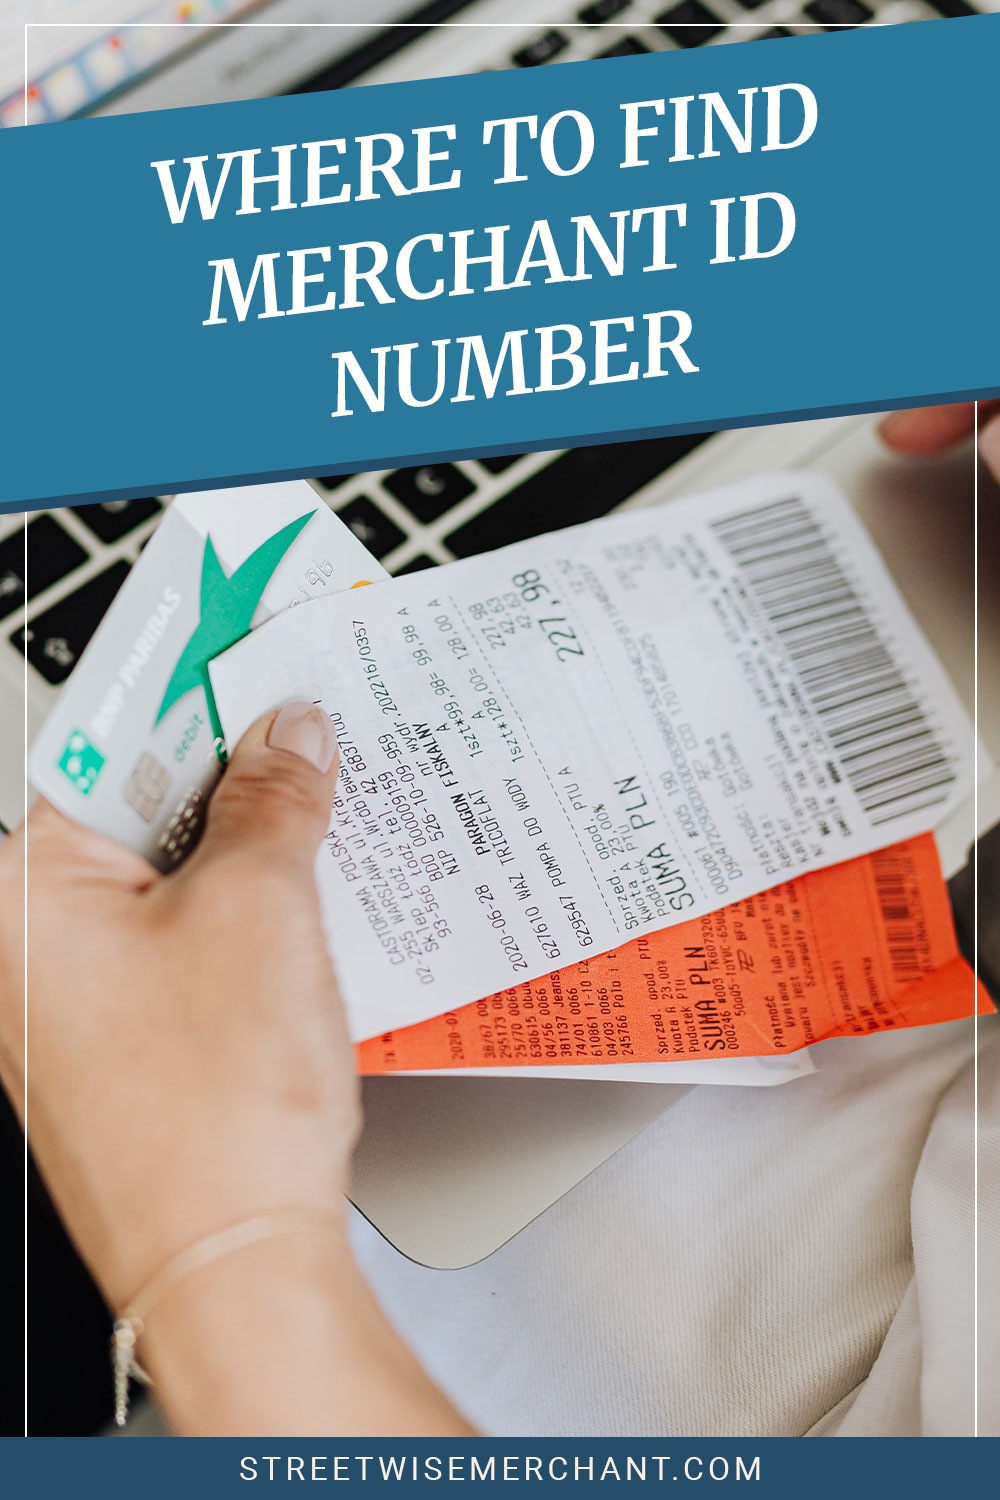 Hand holding receipt on a laptop - Where To Find Merchant Id Number